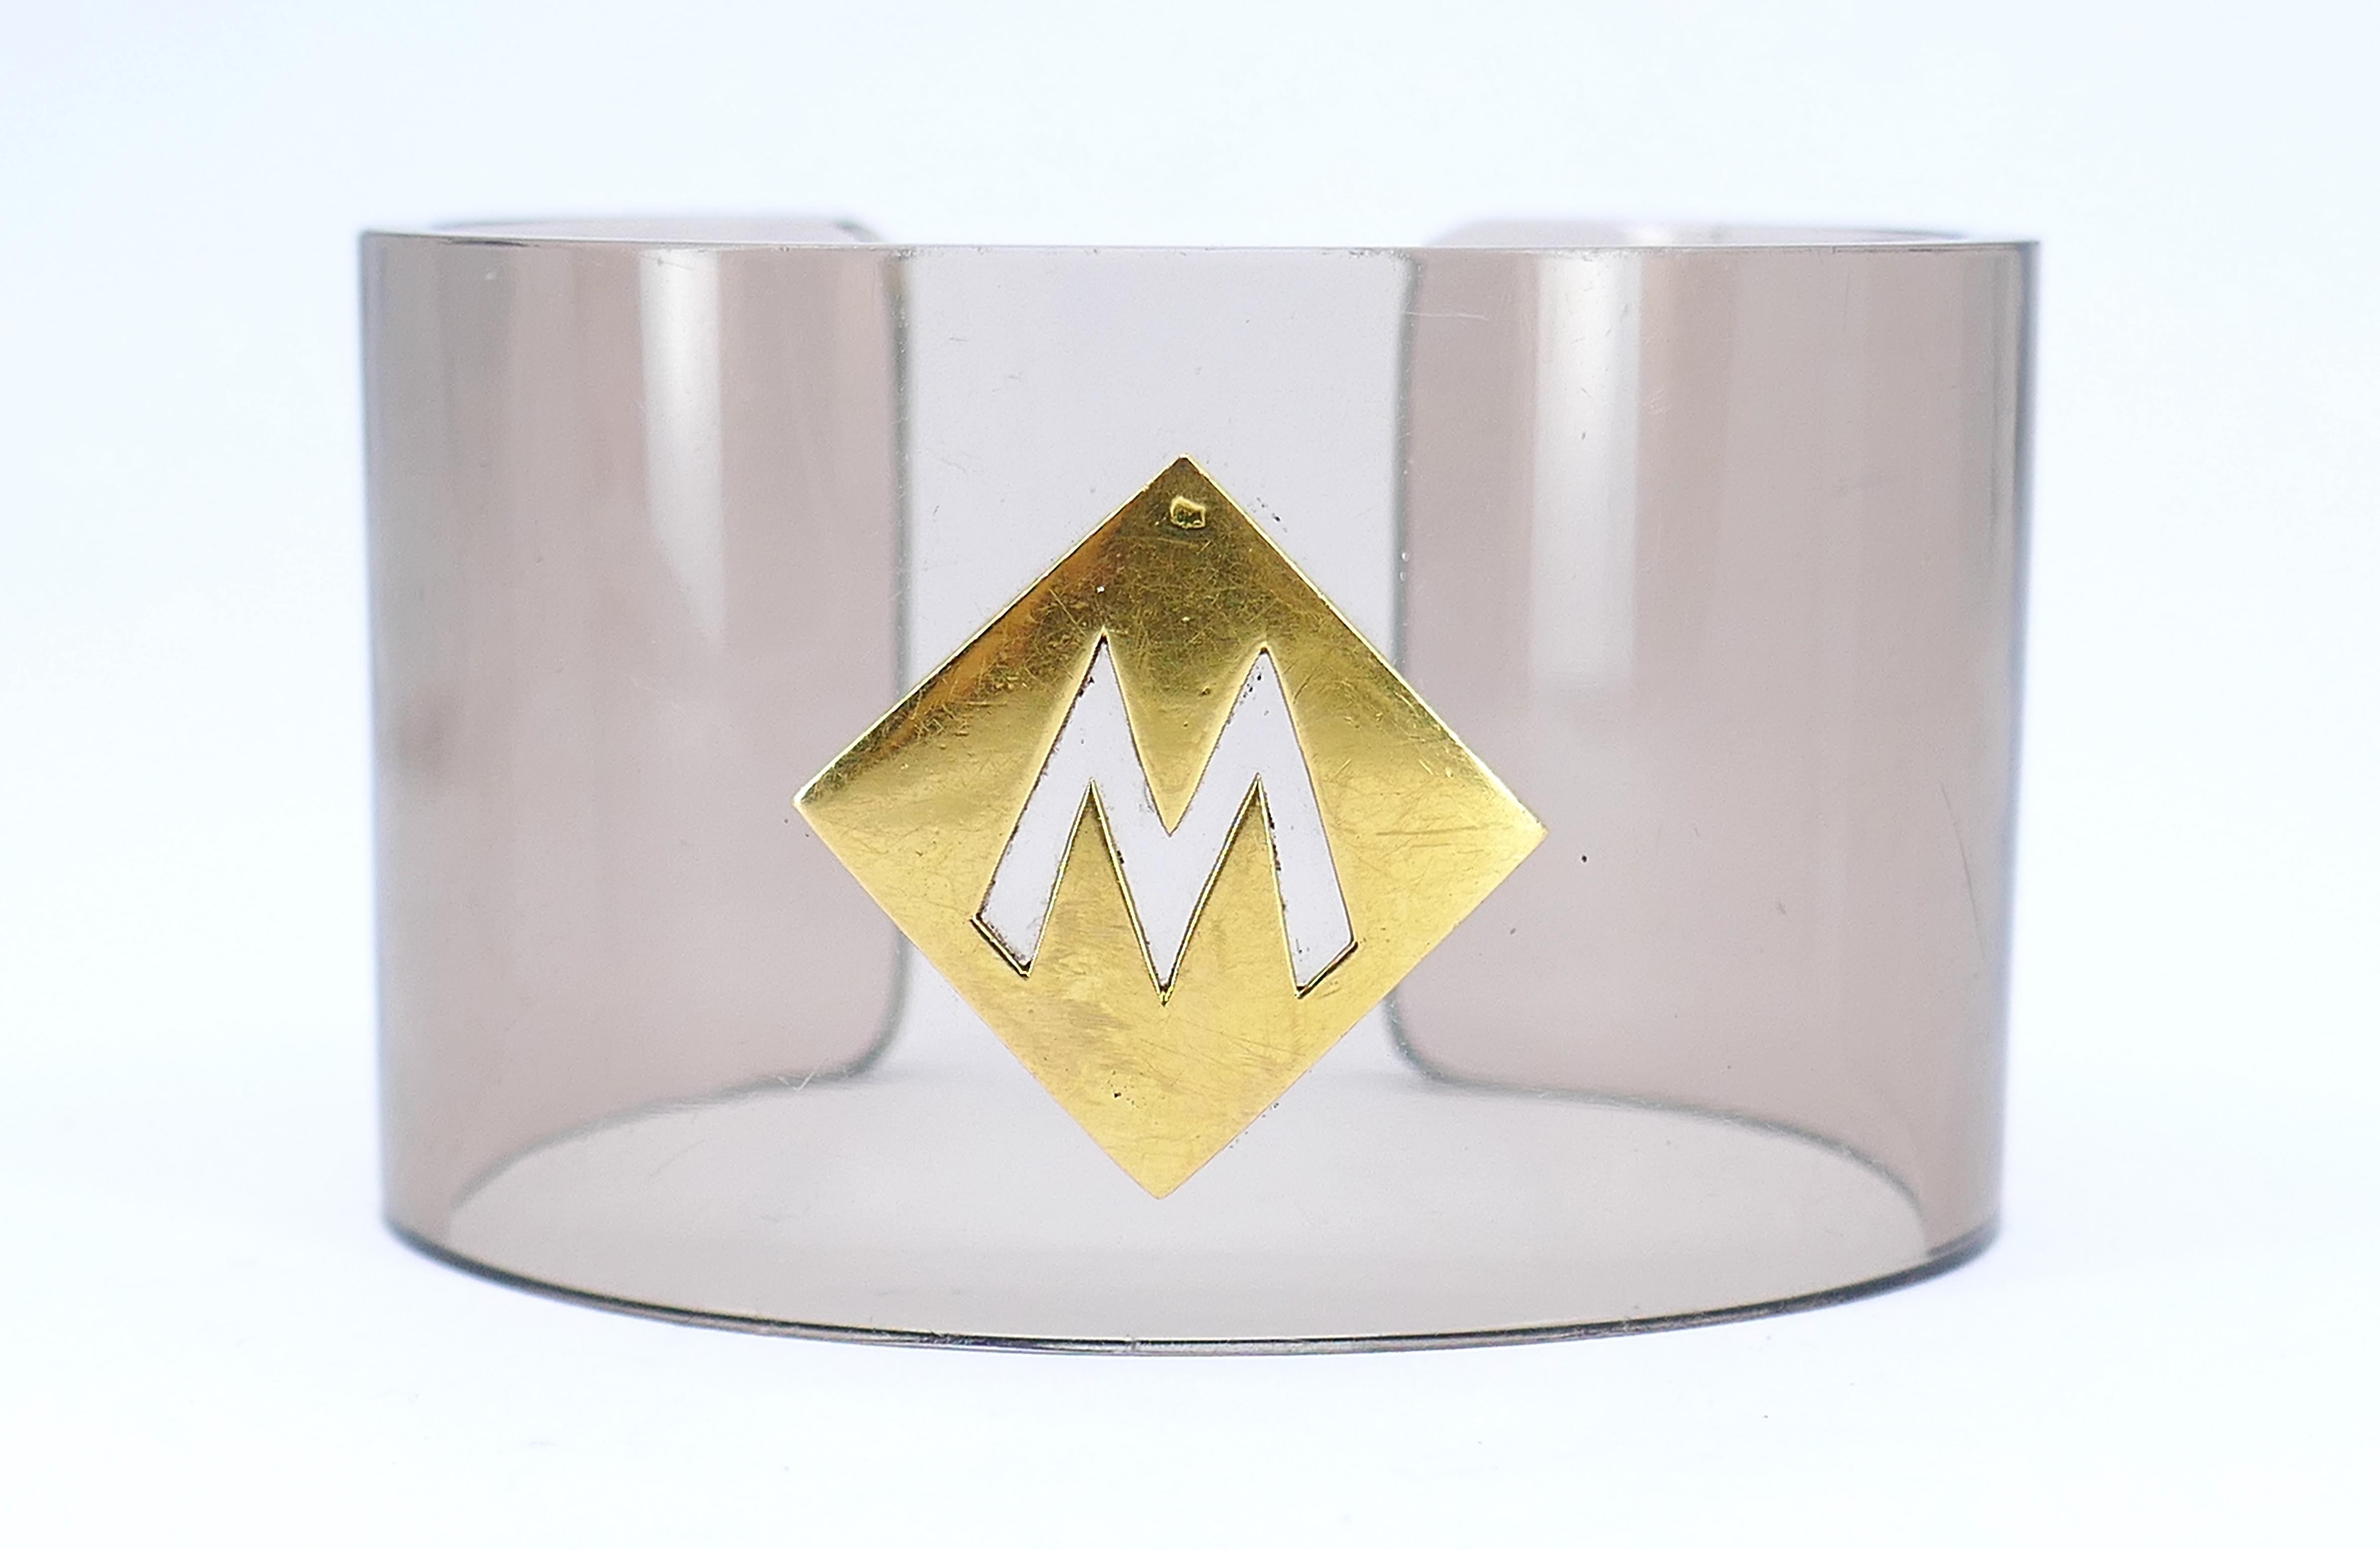 This French acrylic cuff seamlessly merges modern design with timeless elegance. Adorned with an 18K gold rhombus, the striking cutout in the shape of the letter 'M' adds a personalized touch. With an inner circumference of 6